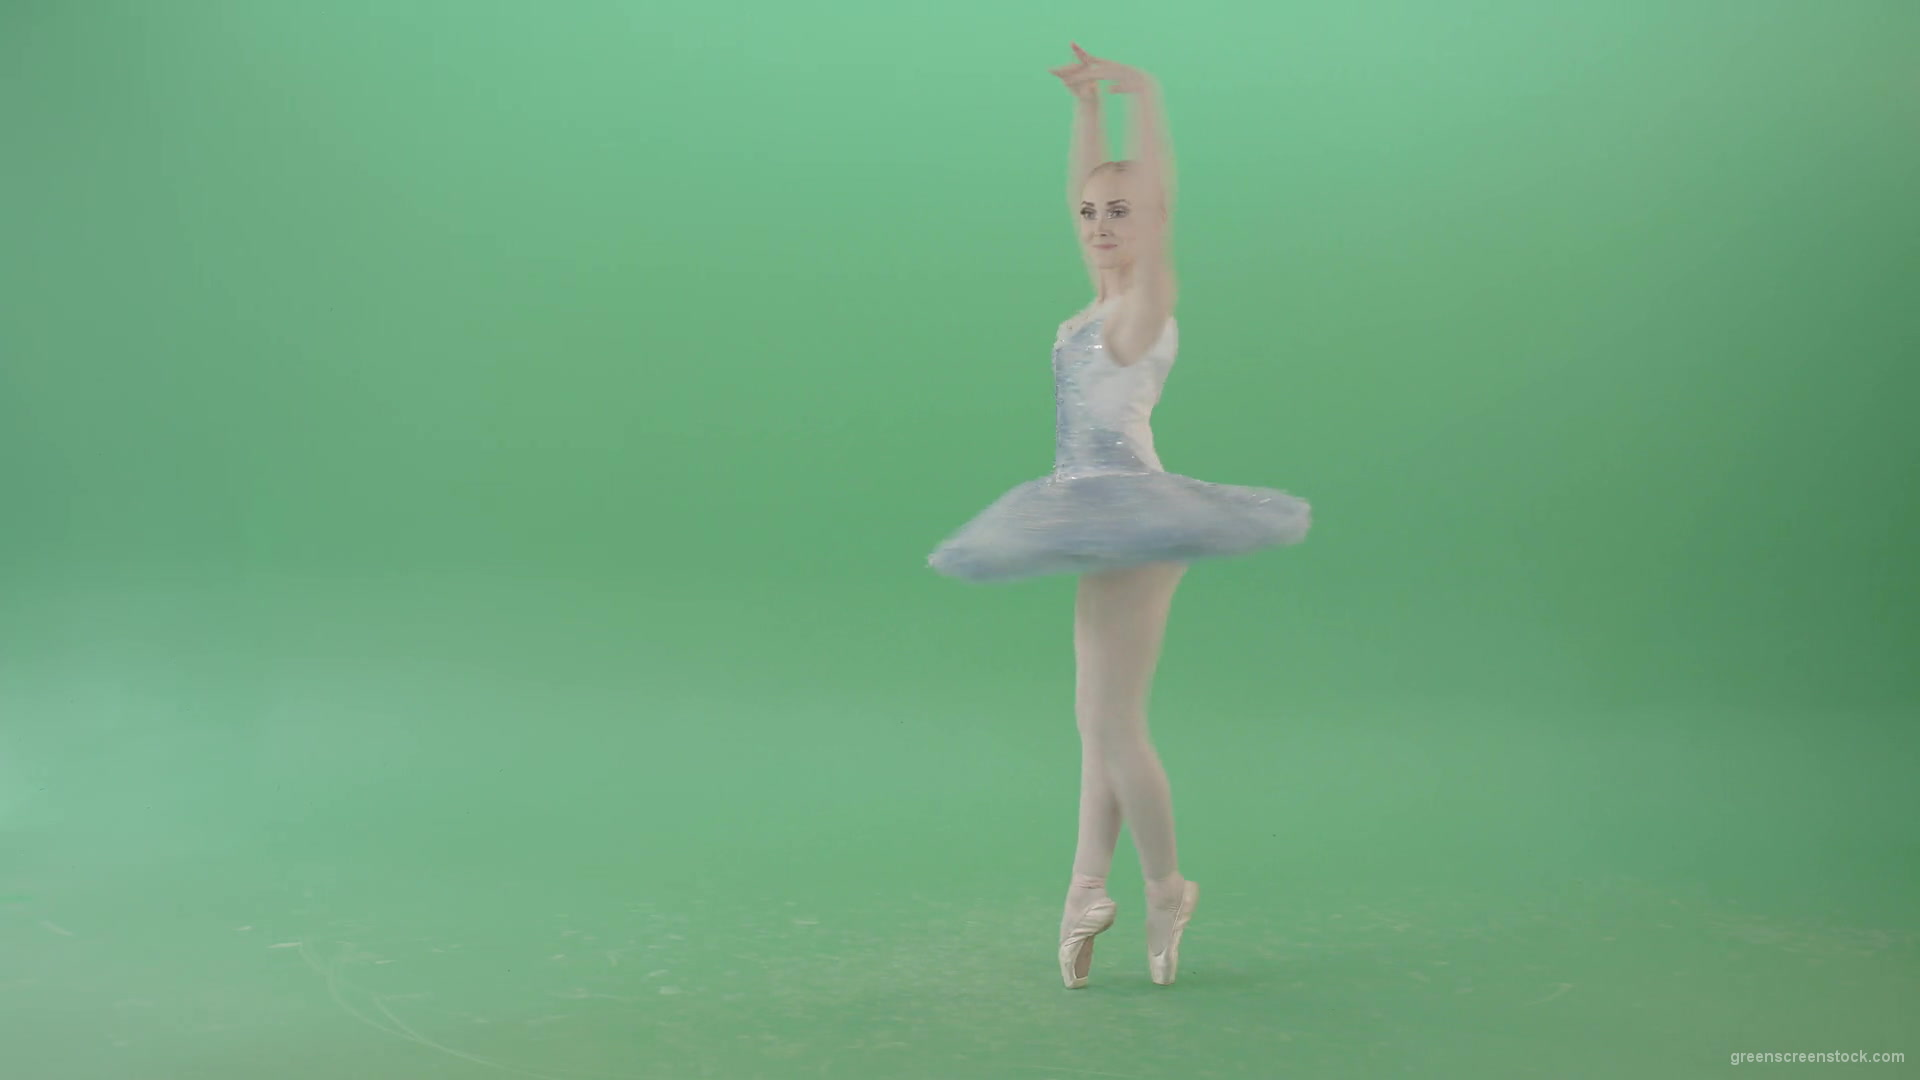 Beauty-blonde-girl-with-happy-smile-spinning-in-ballet-dress-over-green-screen-4K-Video-Footage-1920_006 Green Screen Stock